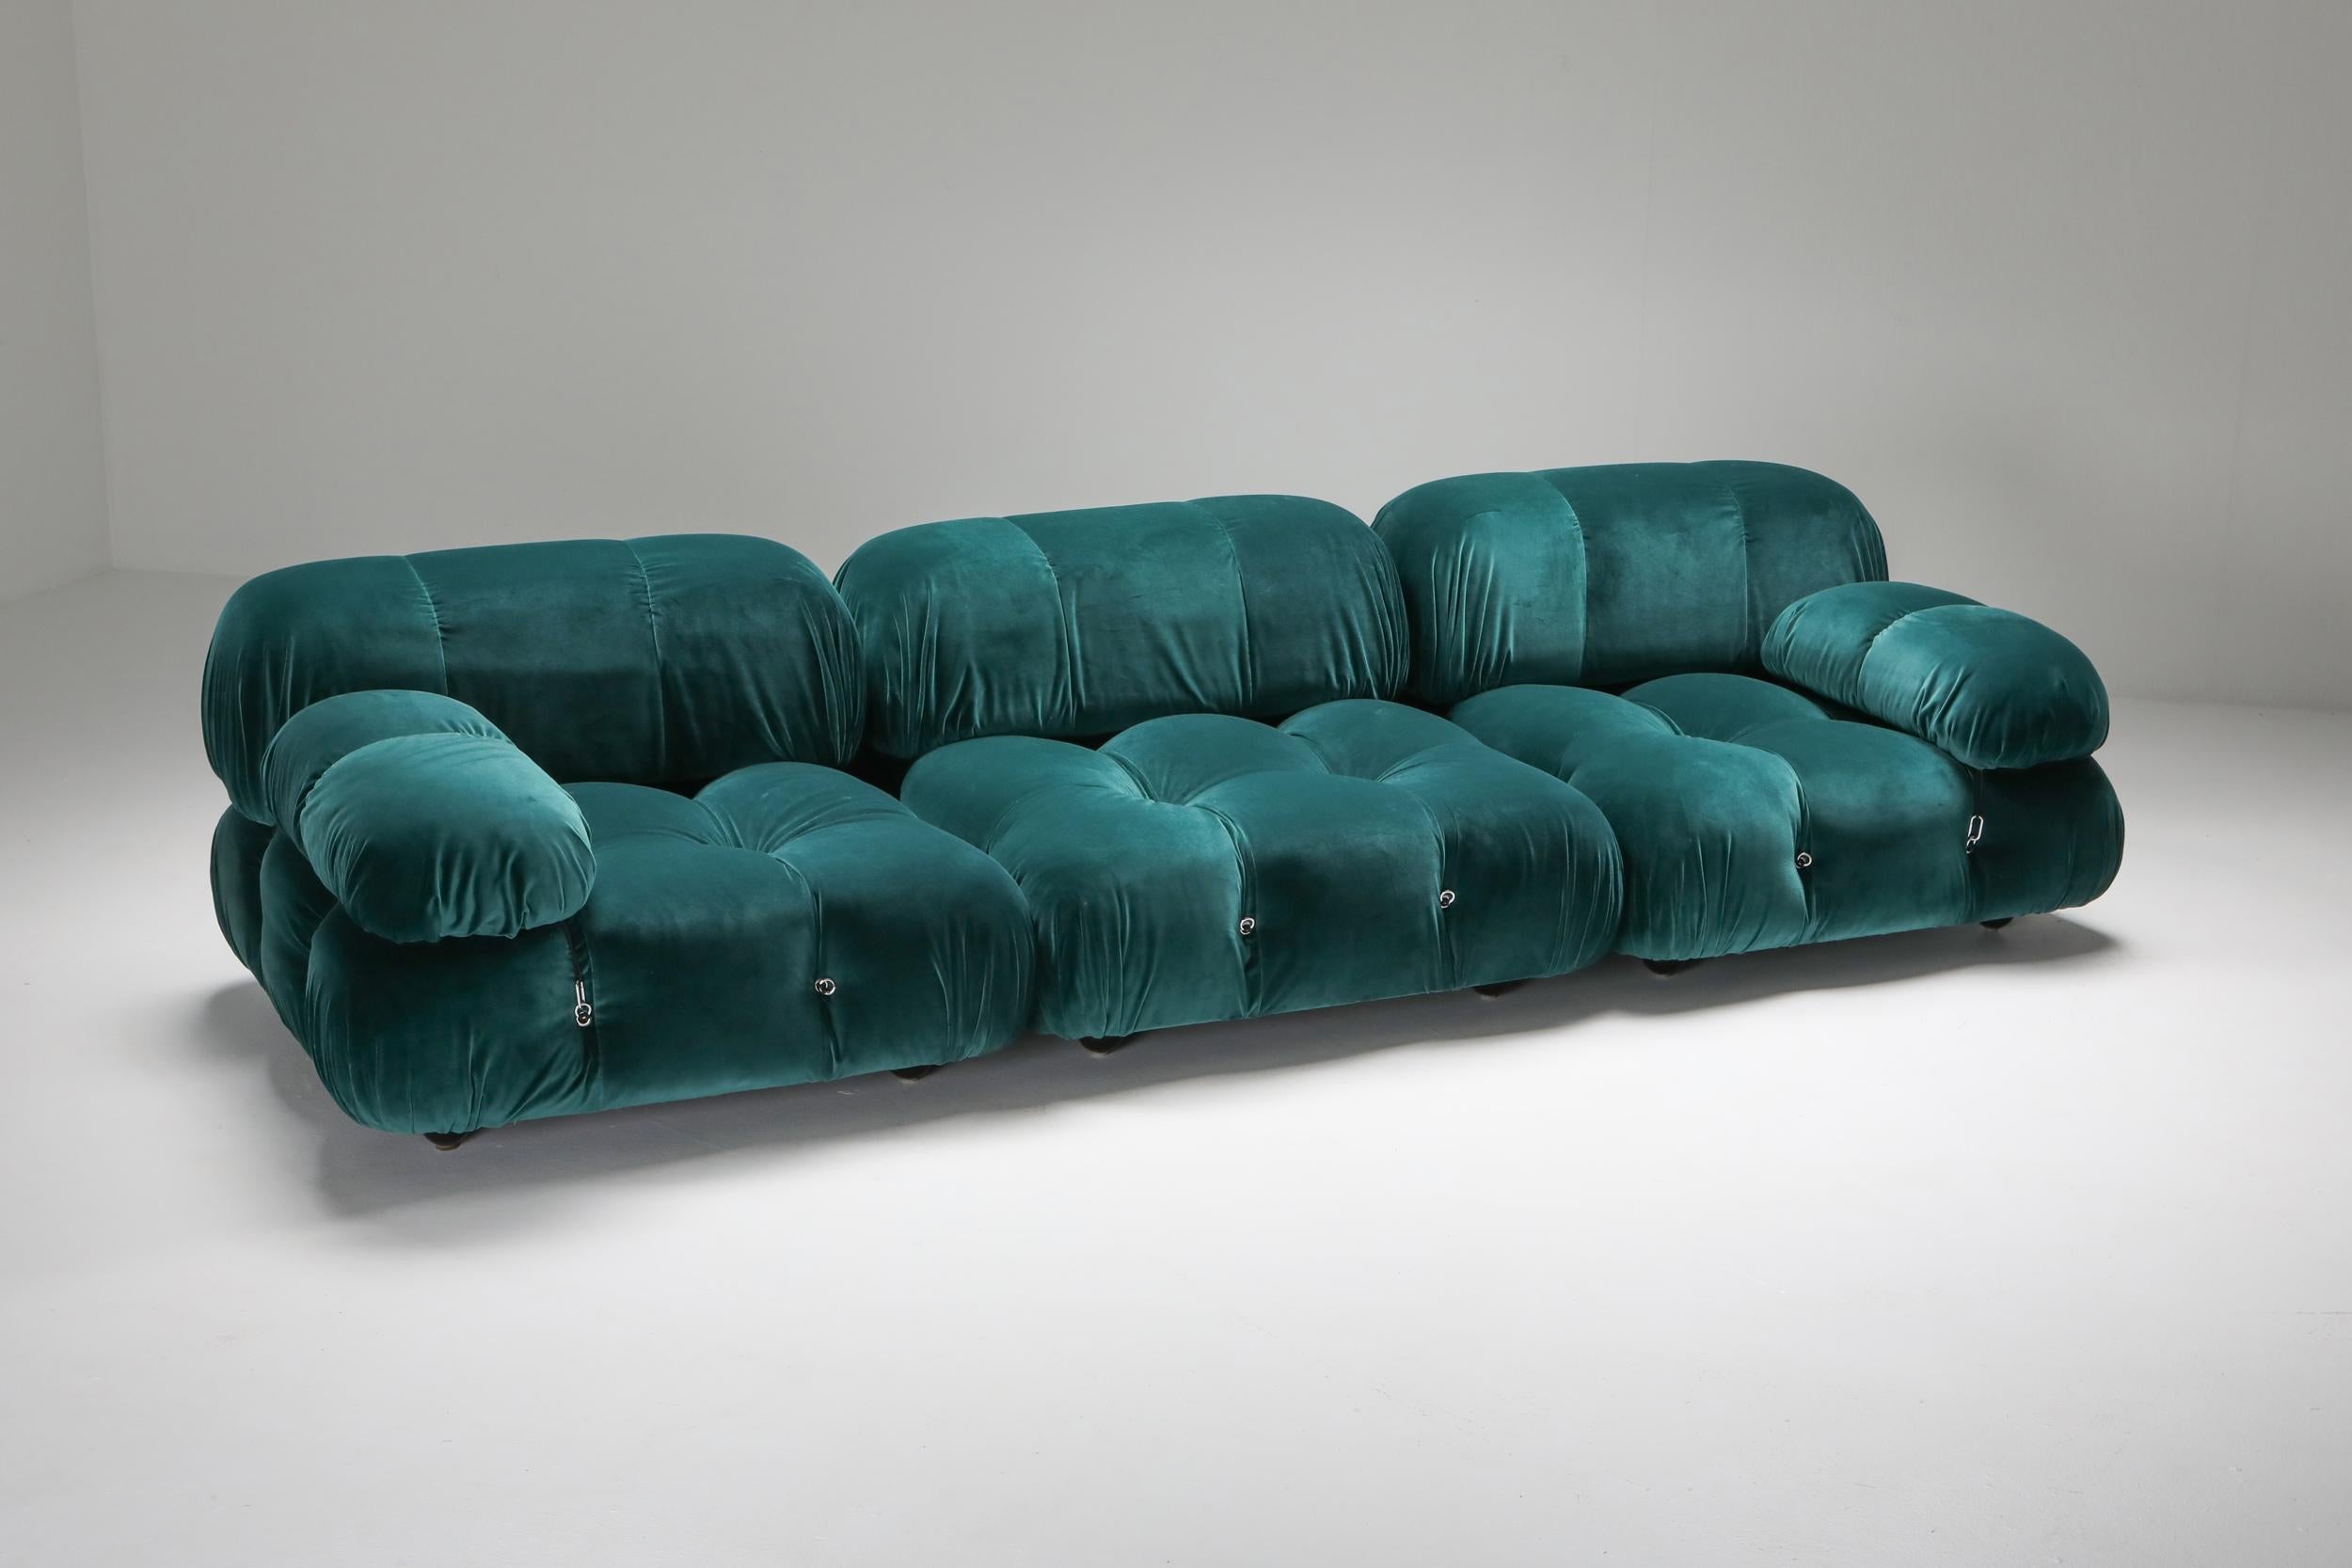 Camaleonda, original vintage, reupholstered in petrol blue velvet, B&B Italia

Modular Postmodern sectional couch
The entire sofa consists of 3 big seating elements and two armrests. The couch has been reupholstered in a petrol green velvet